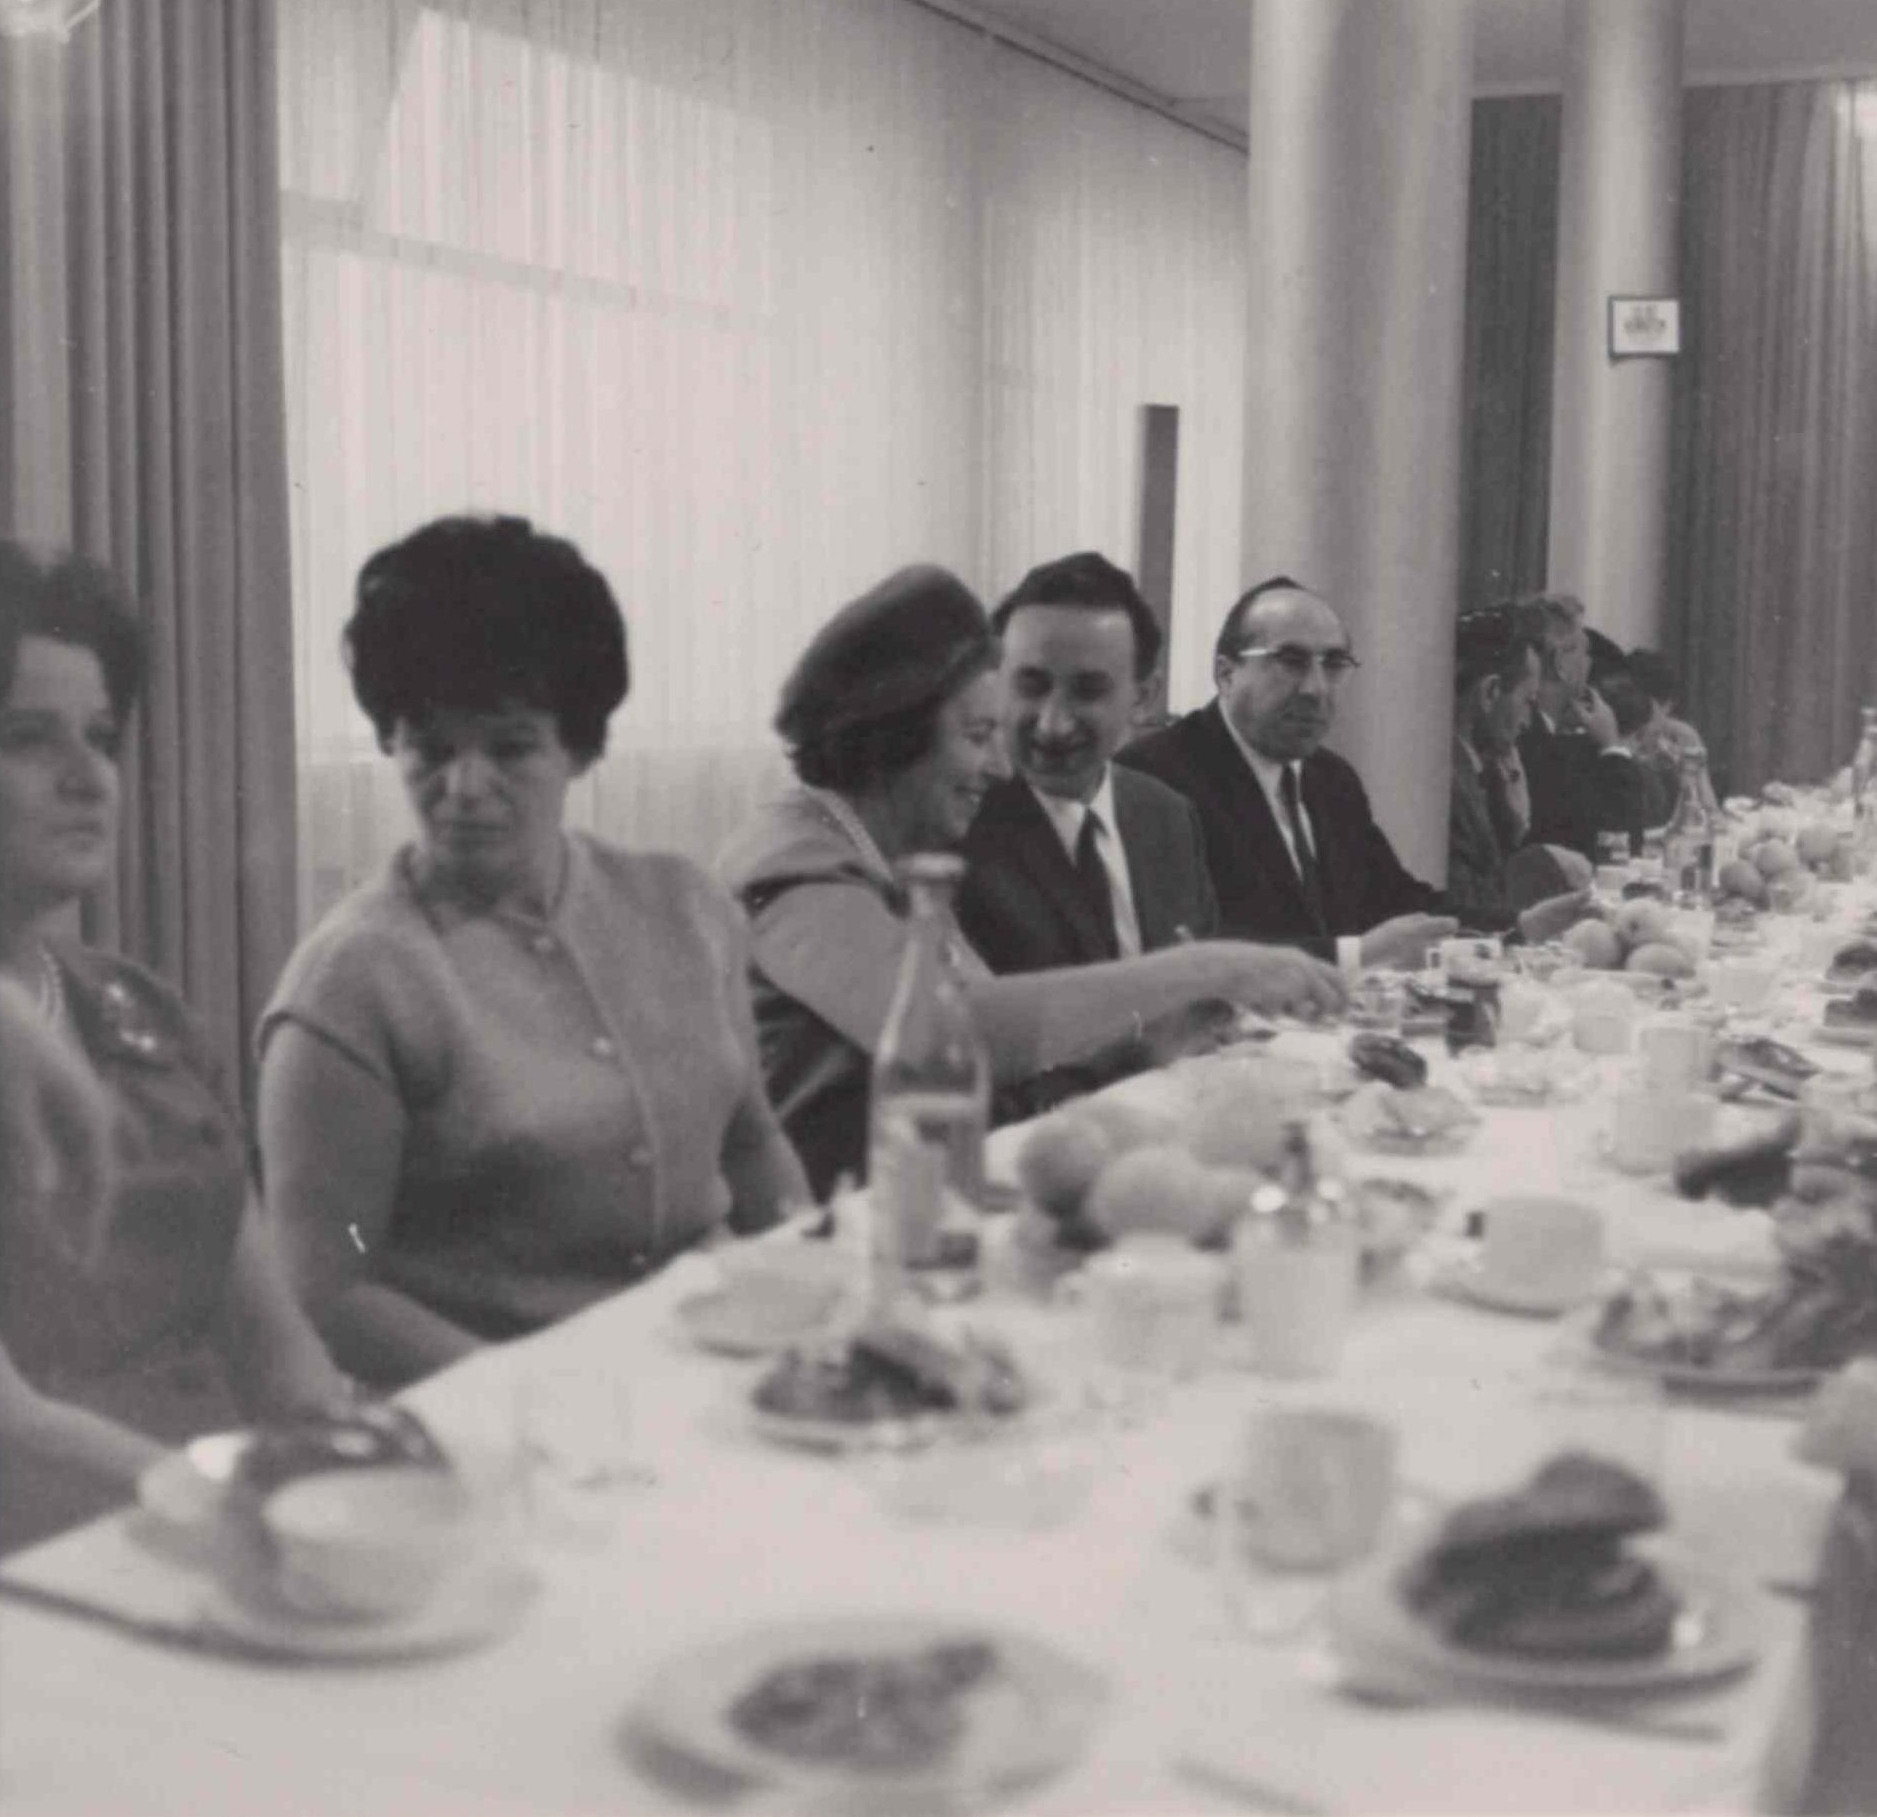 Community event in the 1960s. Collection Jewish Community Wiesbaden